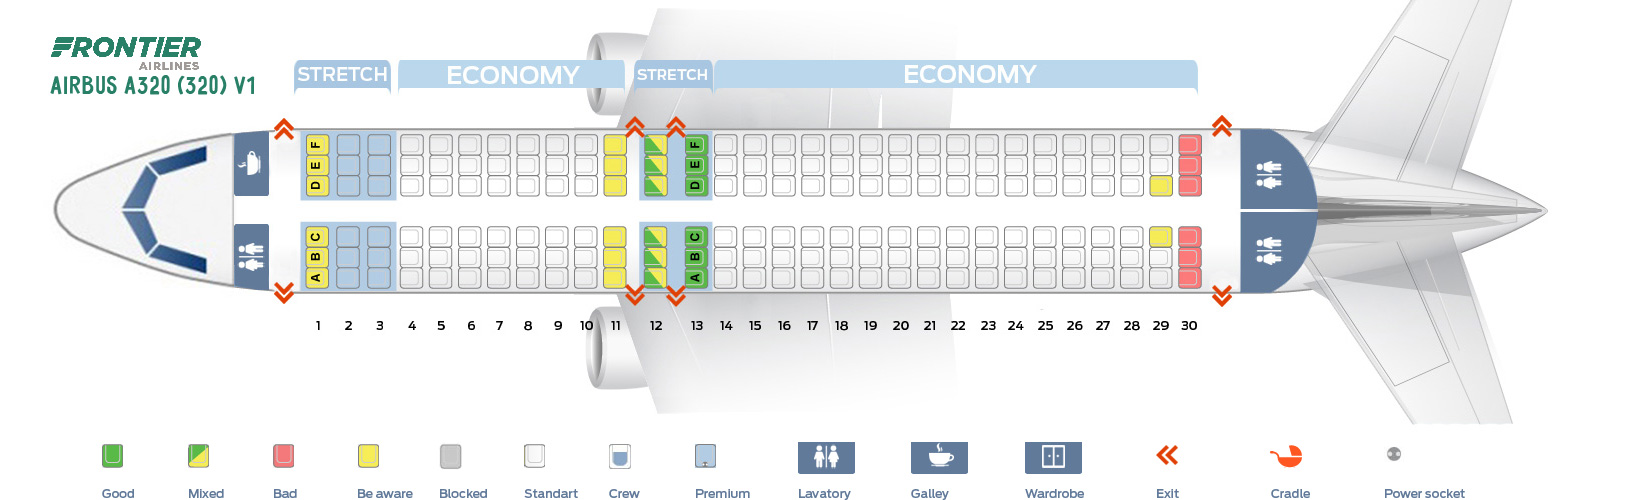 Frontier Airlines Airbus A320 200 Seat Map and Seating Chart Cabin V1 320